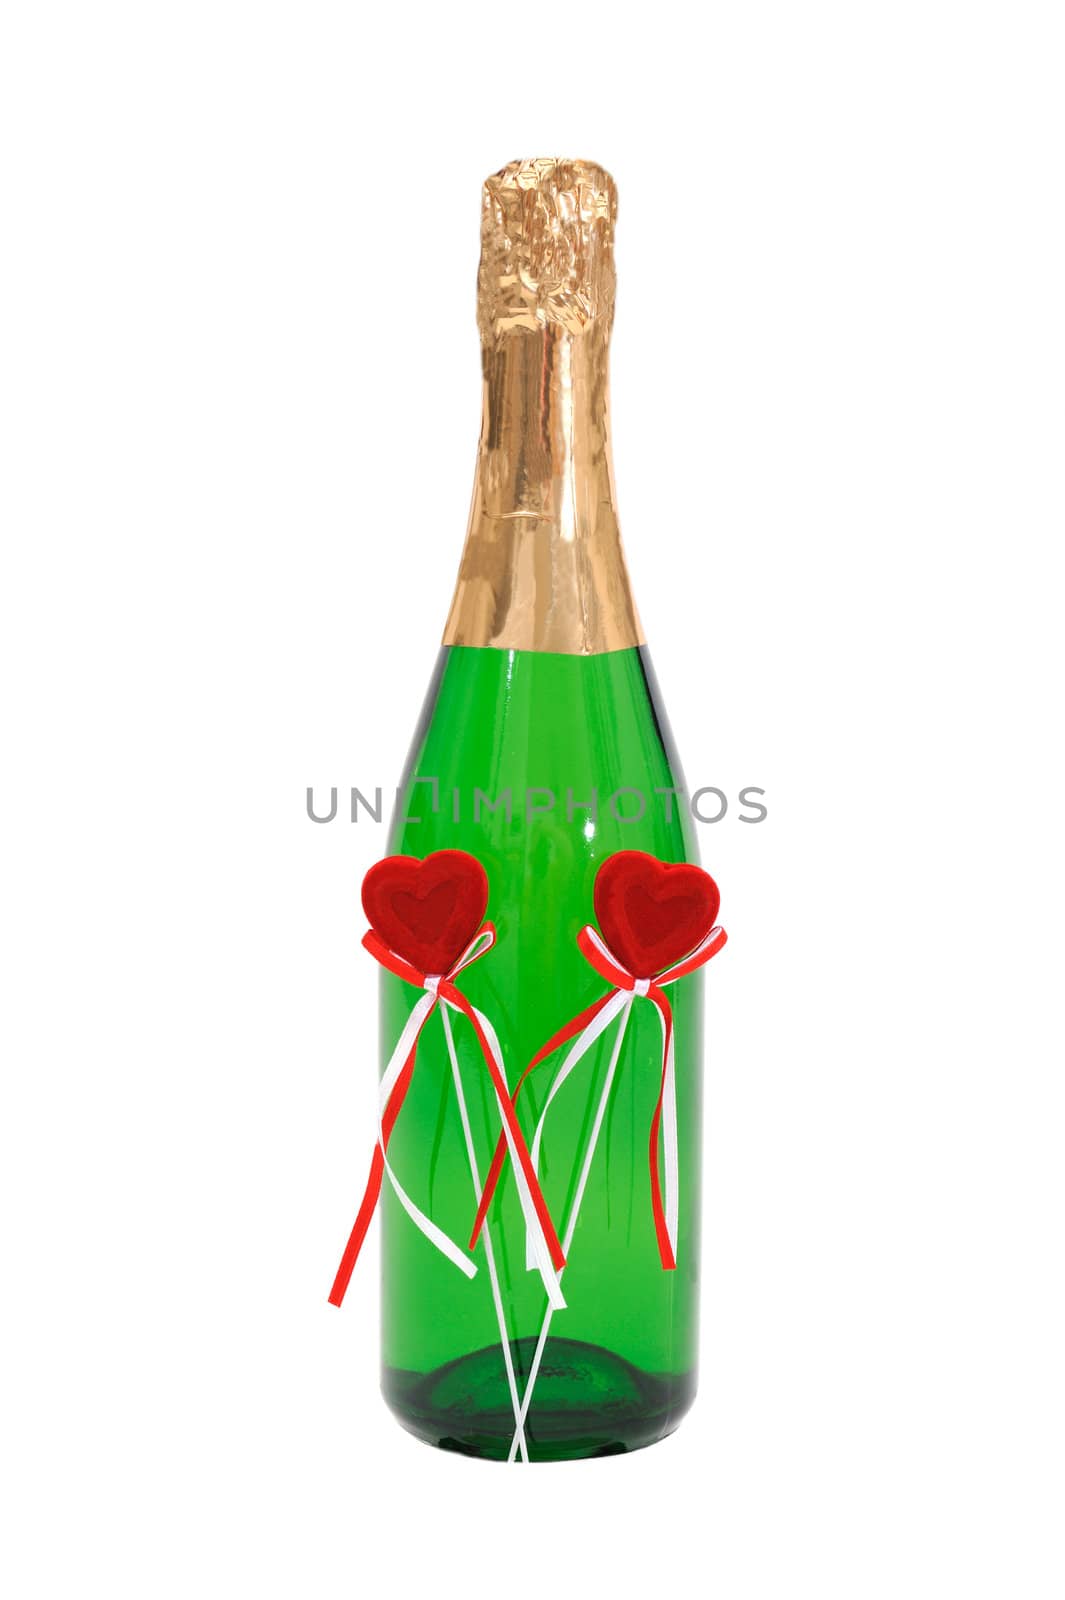 Bottle effervescent wine which decoration two plush red hearts. Isolated on white background.